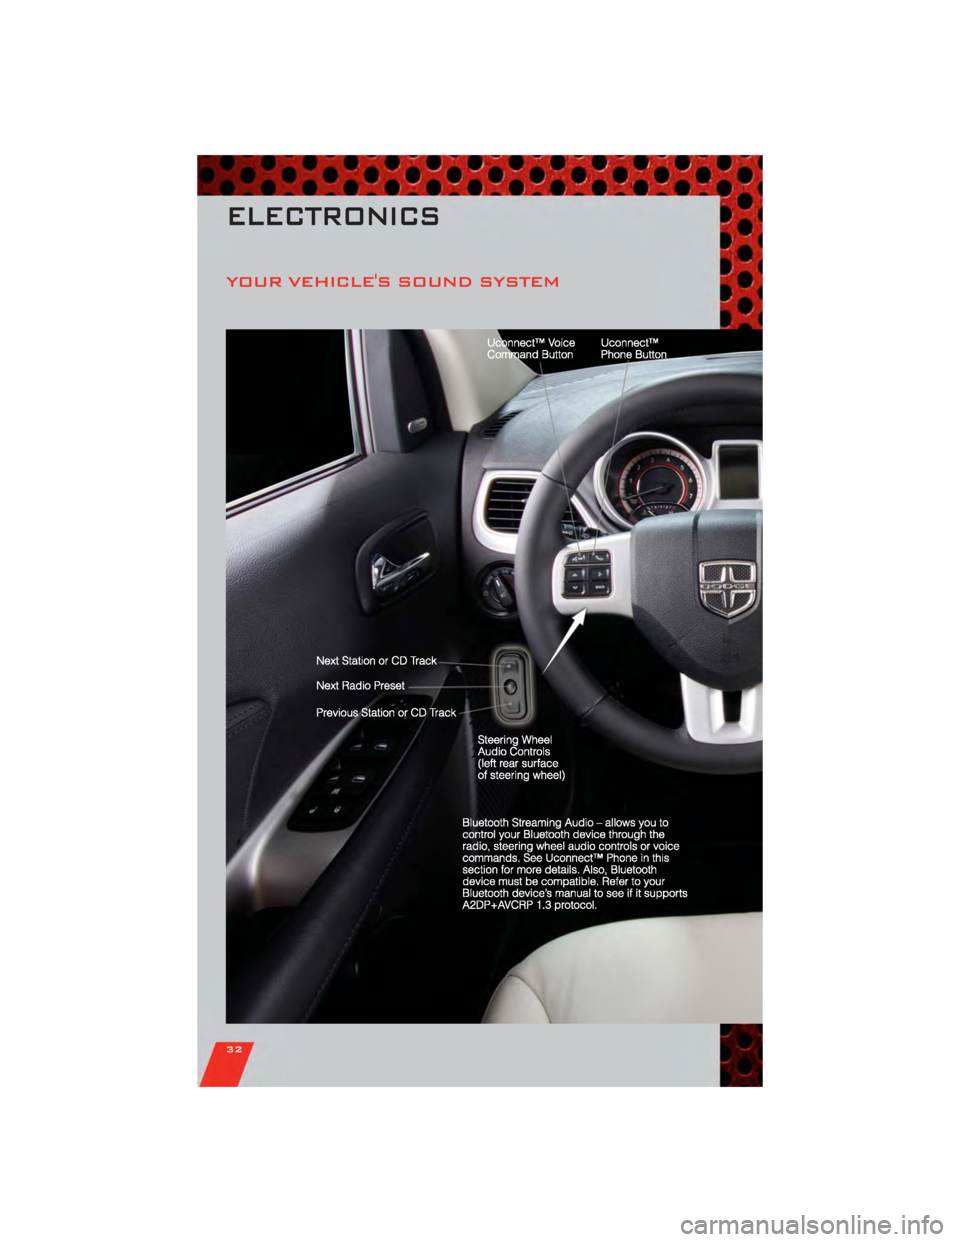 DODGE JOURNEY 2011 1.G Owners Guide YOUR VEHICLES SOUND SYSTEM
ELECTRONICS
32 